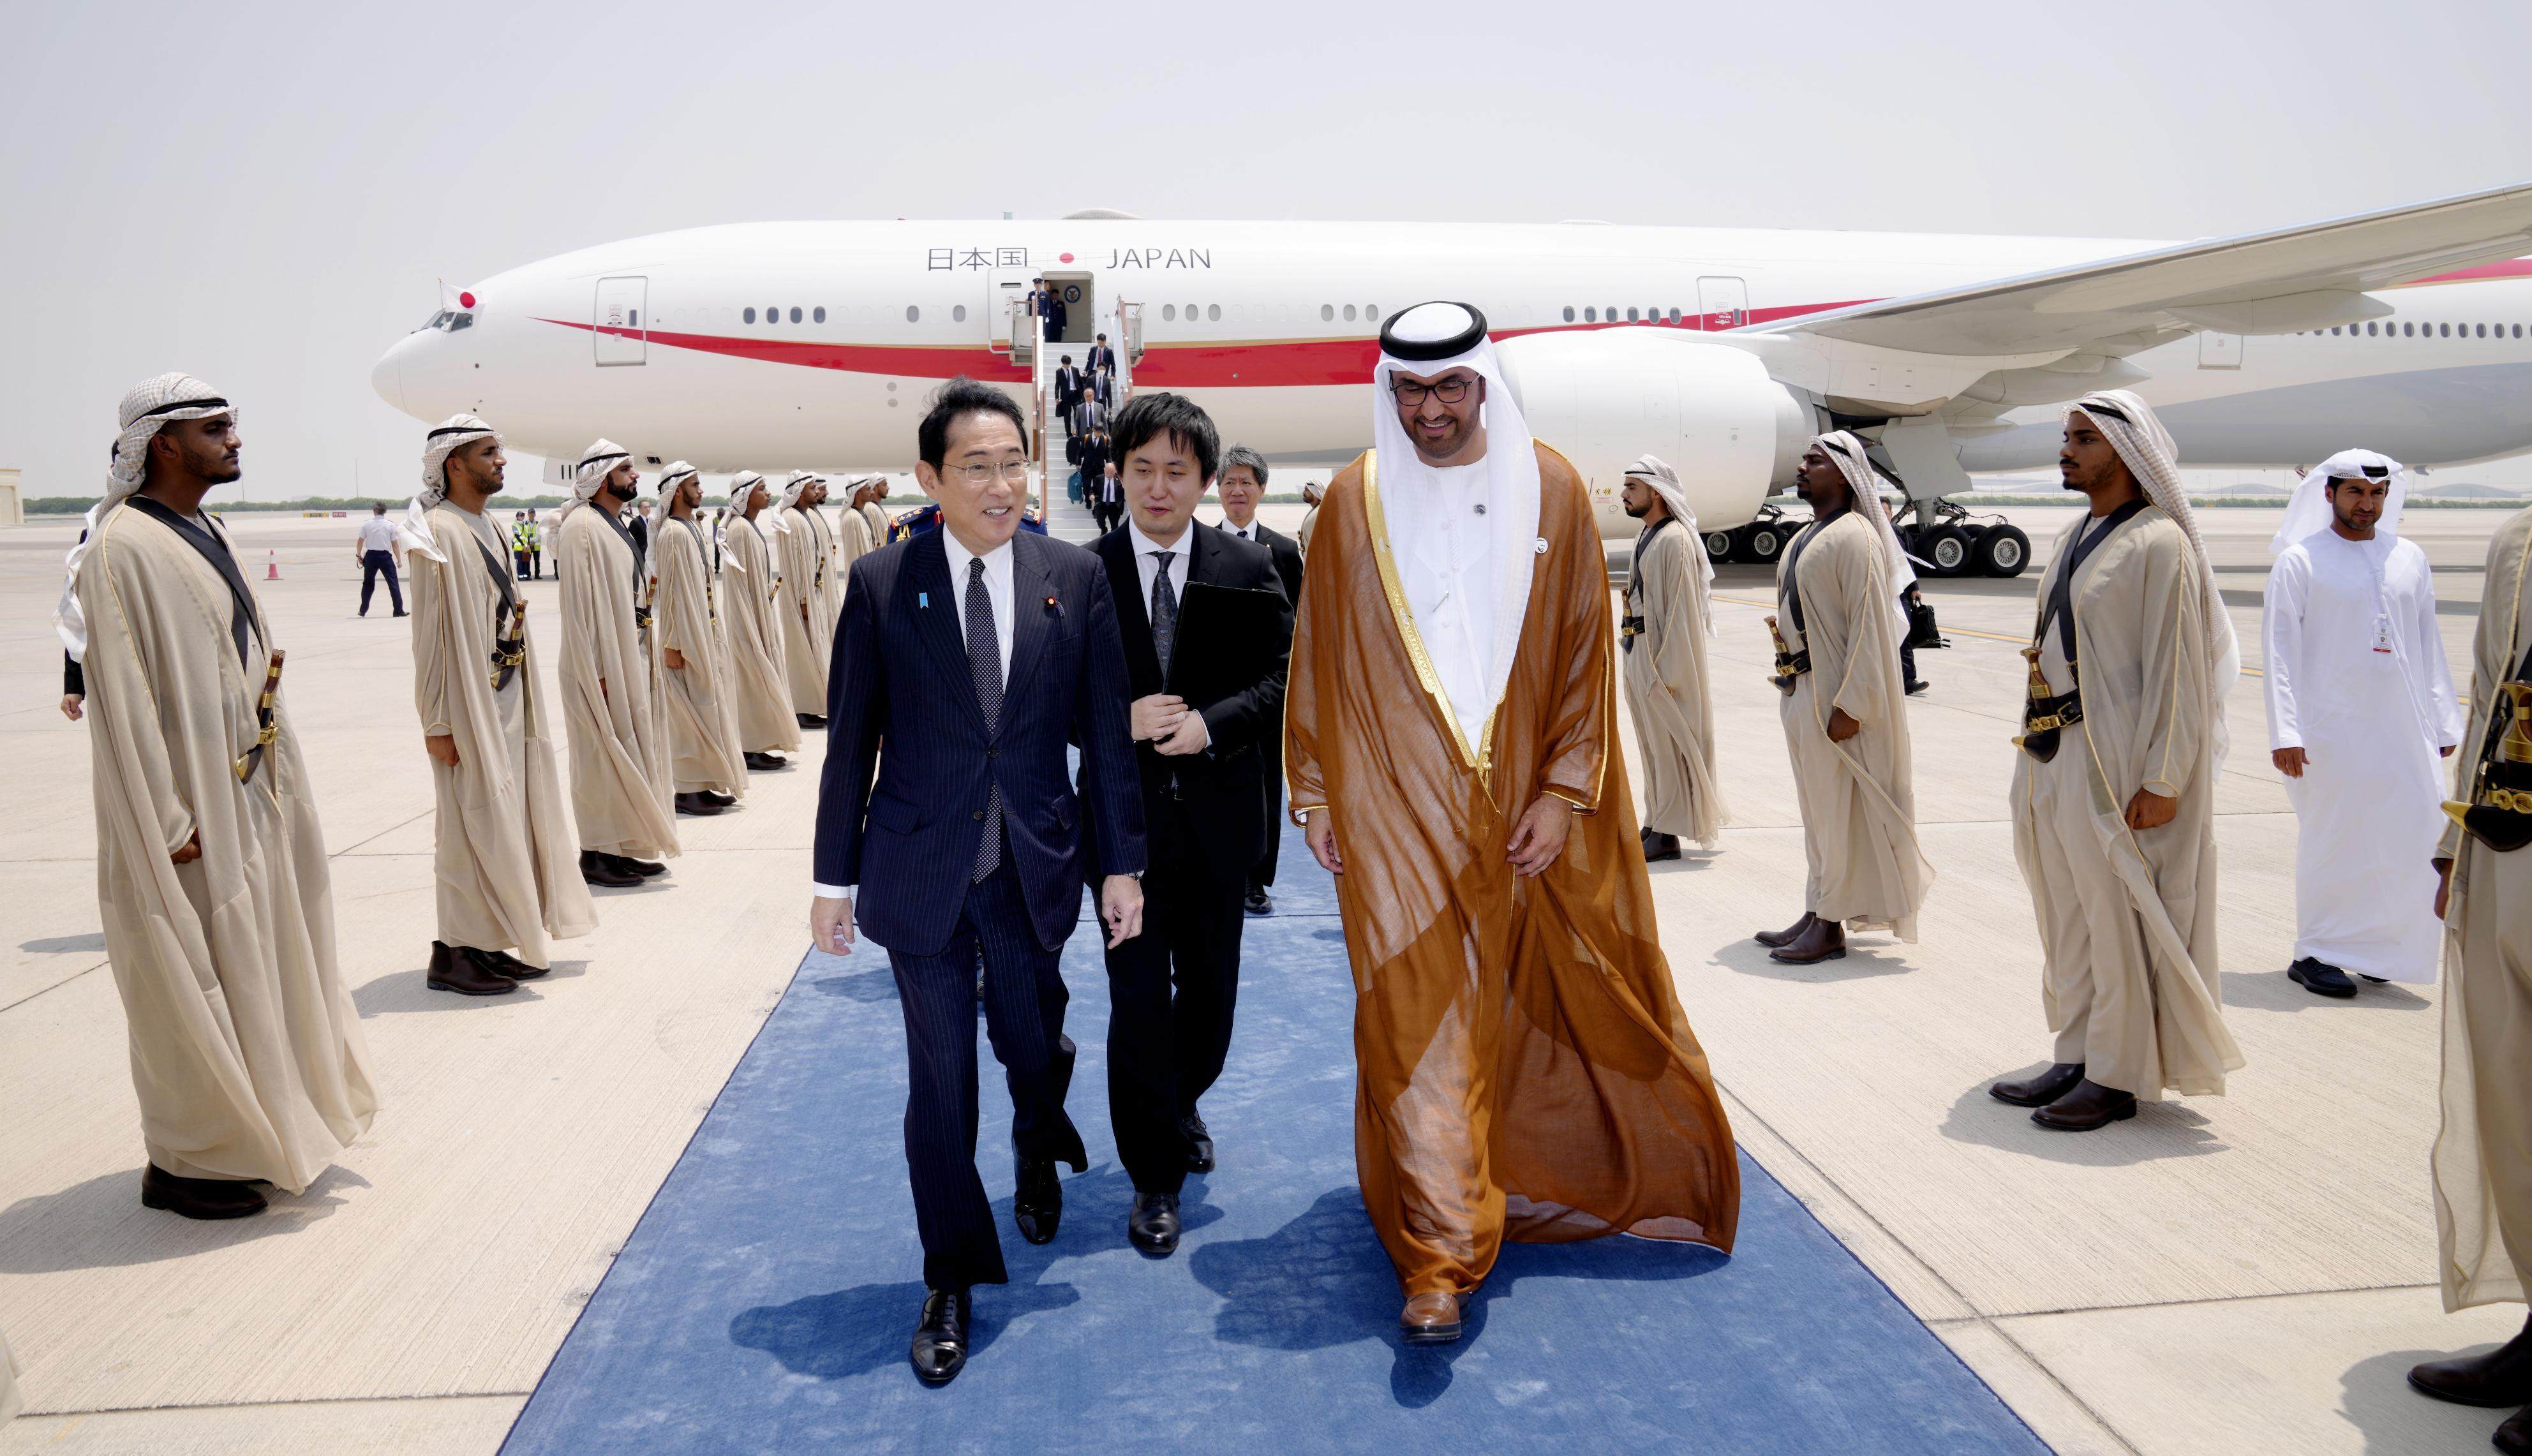 Japanese Prime Minister Fumio Kishida (L) arrives at Abu Dhabi International Airport in Abu Dhabi in the United Arab Emirates as part of a recent trip to the Middle East. Photo: Kyodo